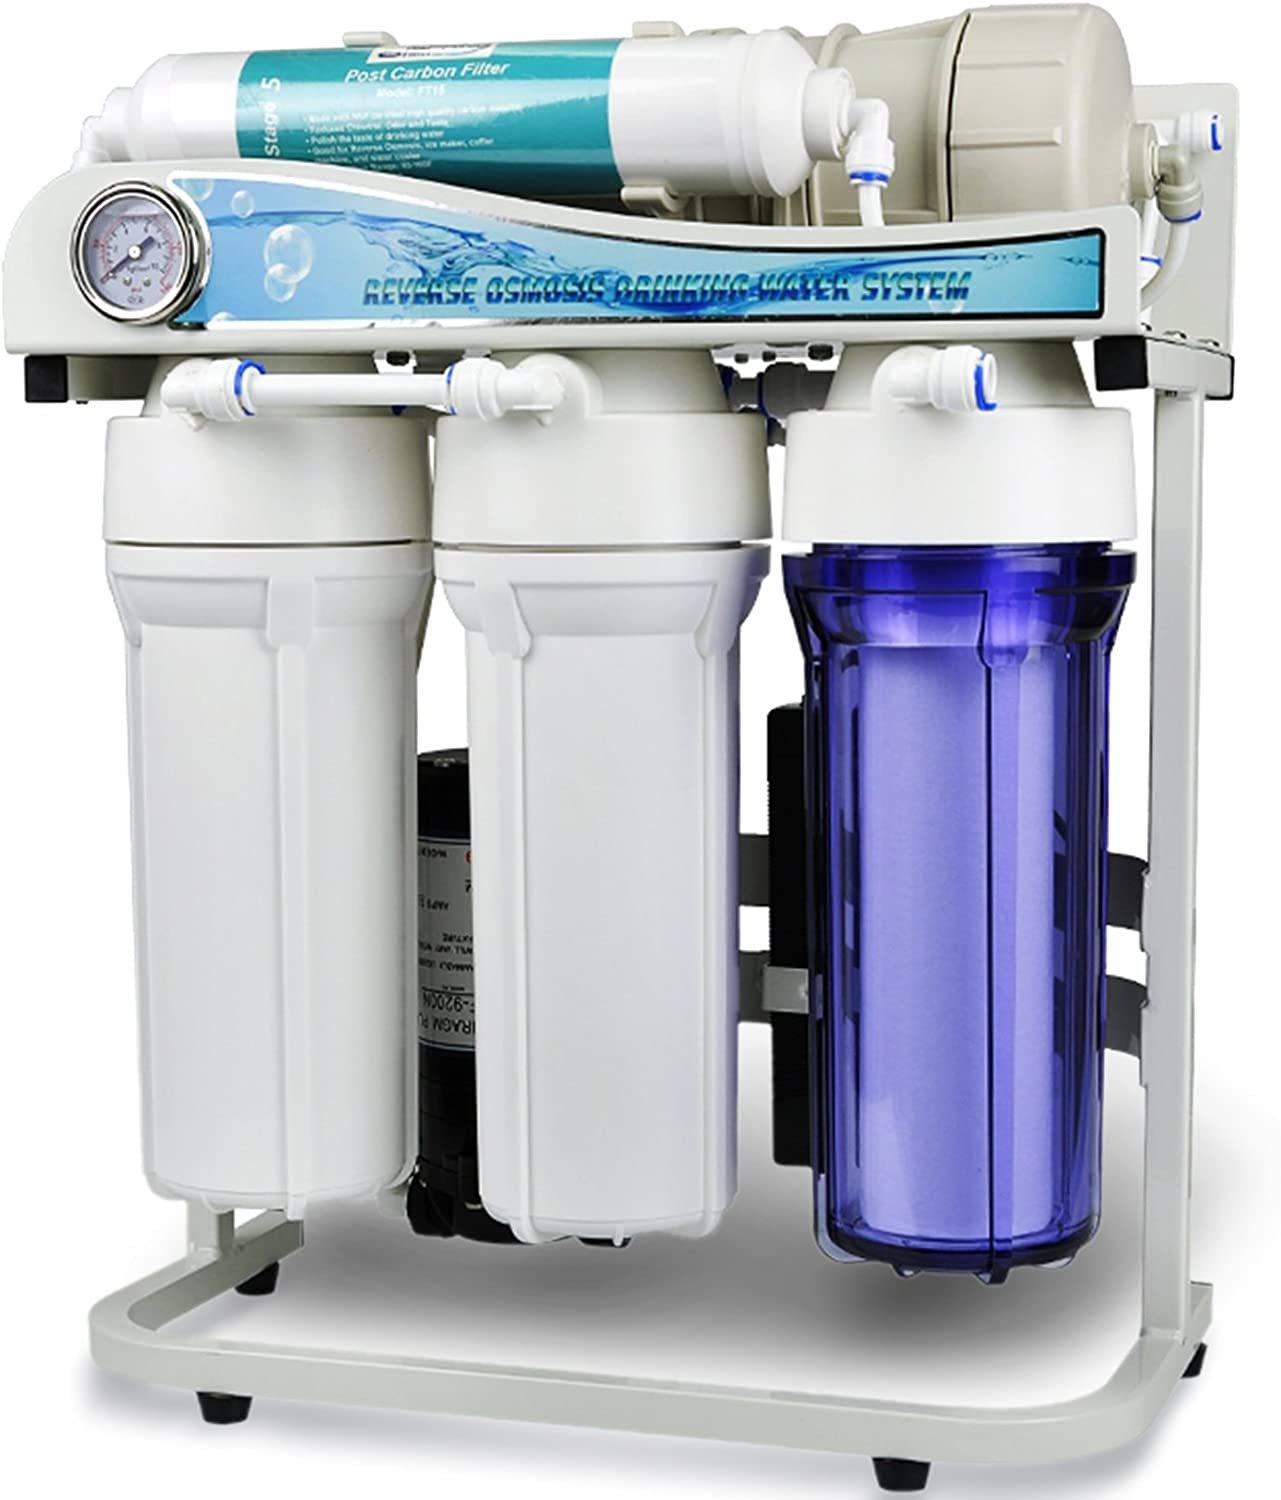 commercial Ispring reverse osmosis system